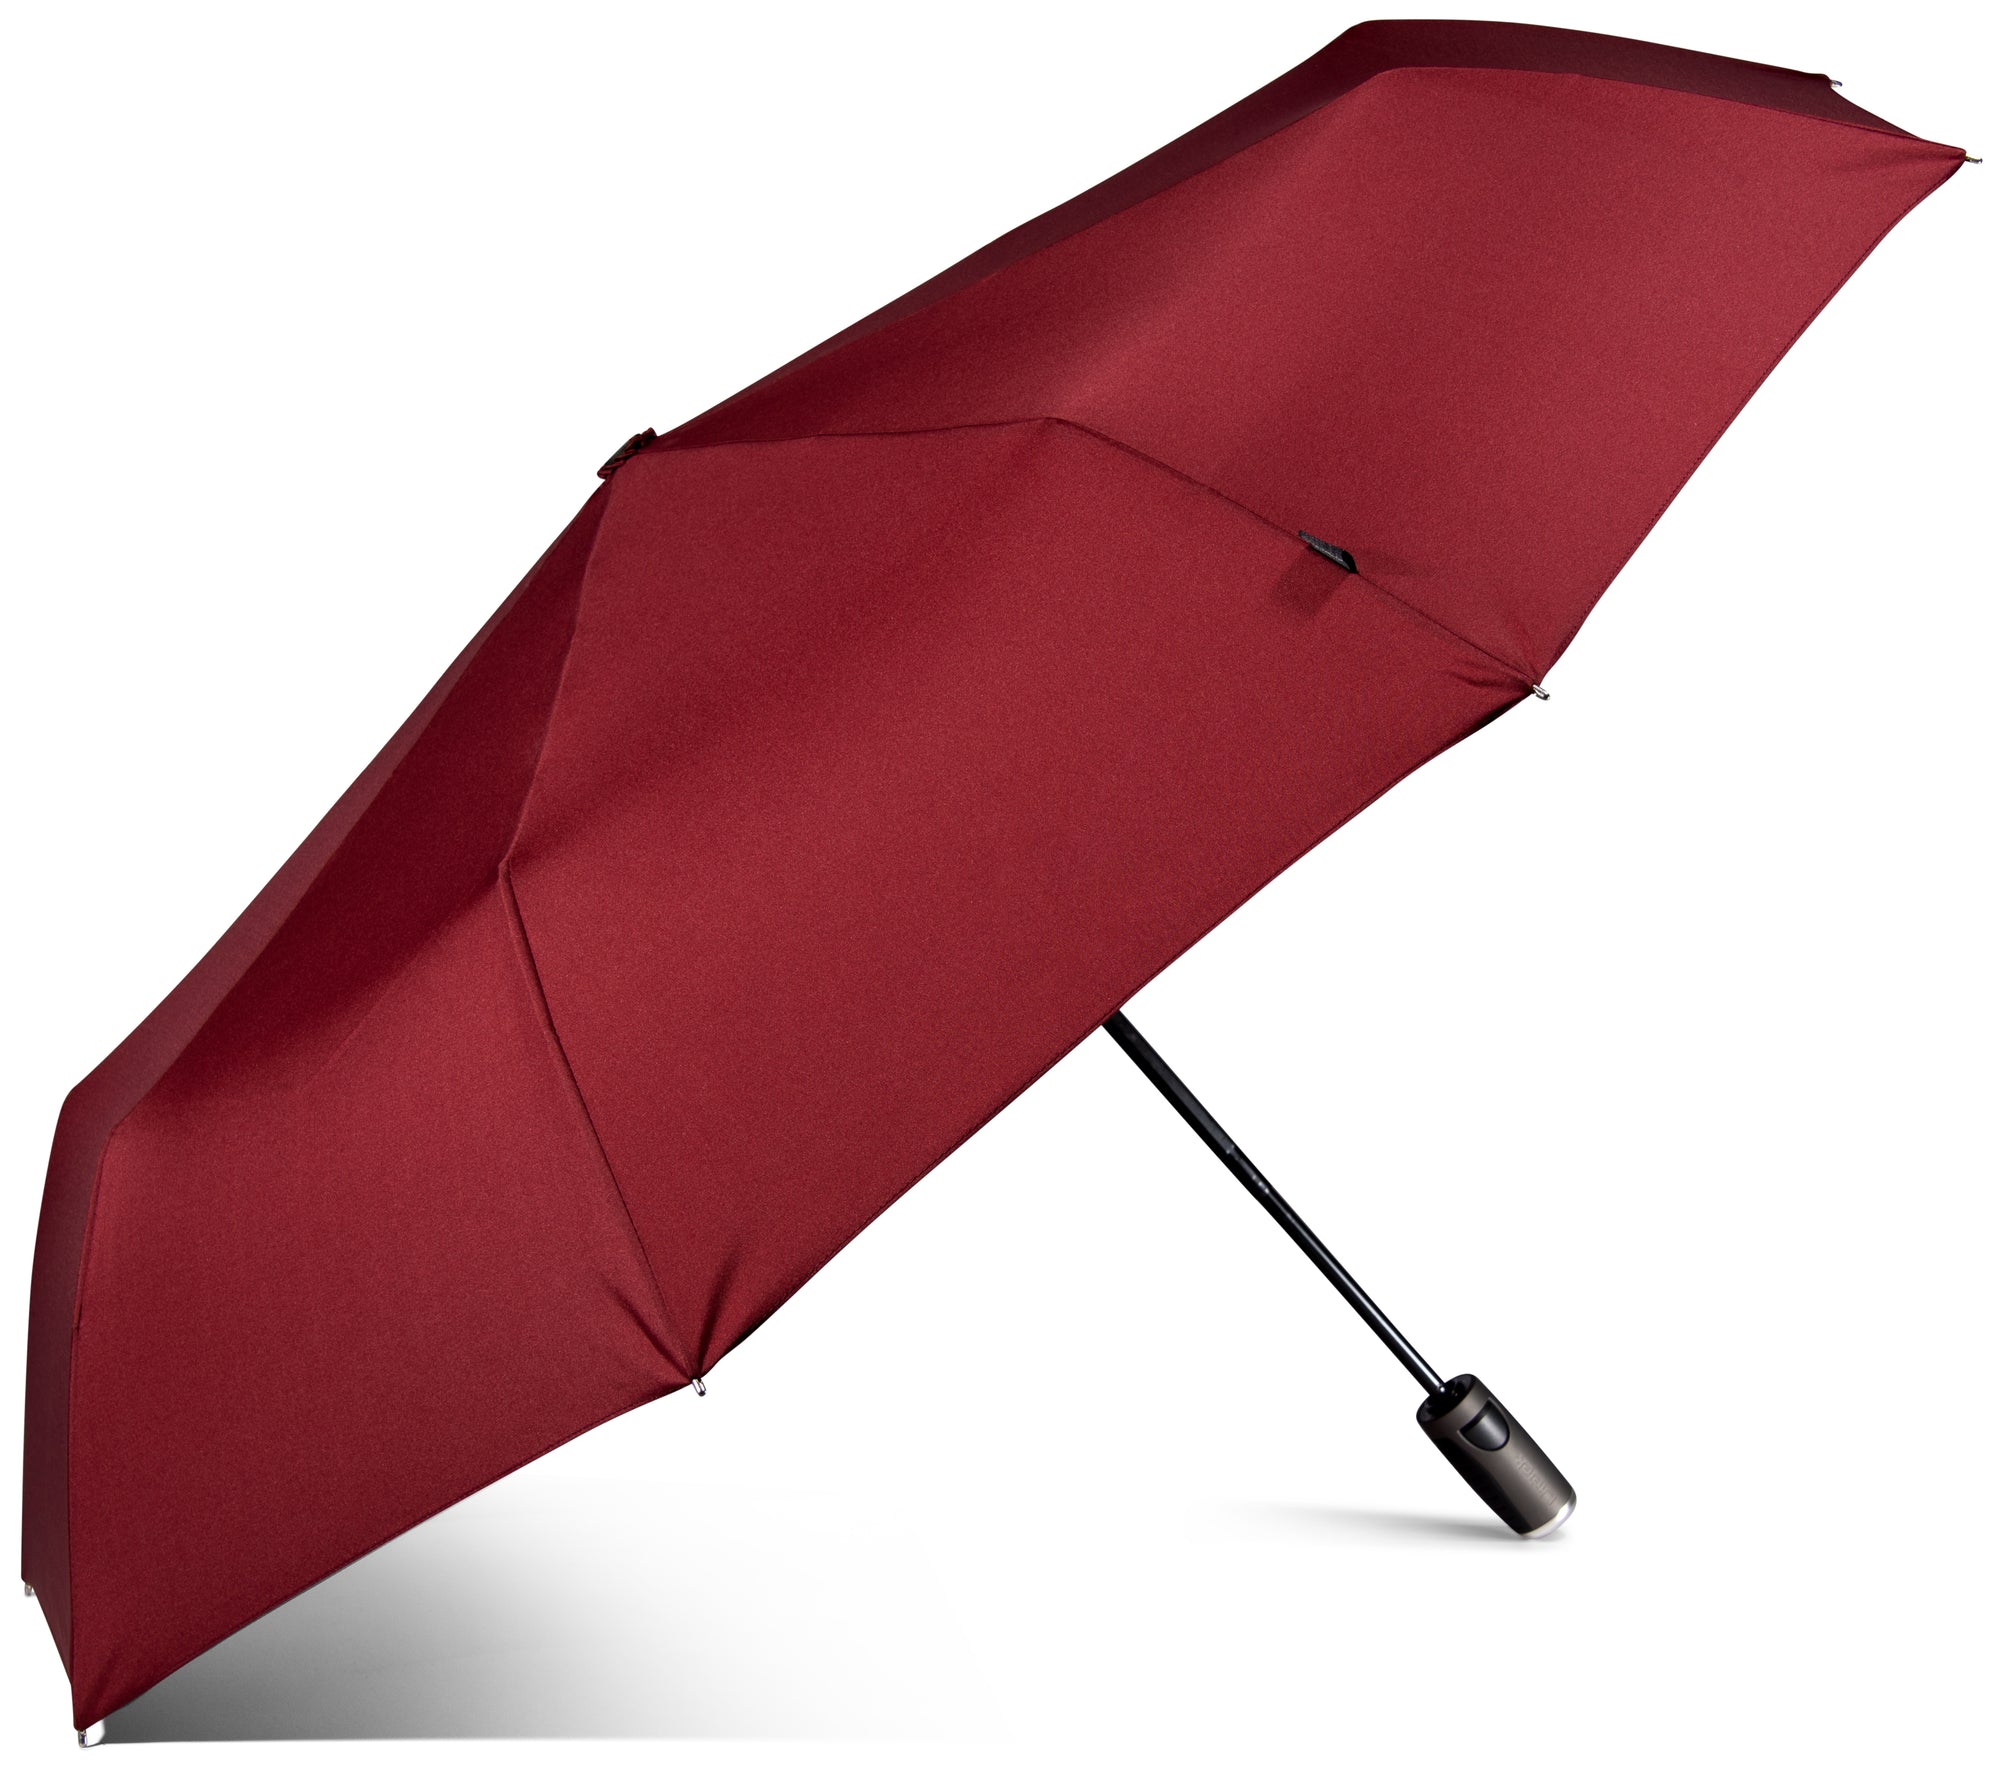 LifeTek Windproof Travel Umbrella - Compact, Automatic, Wind Resistant, Strong and Portable - Small Folding Backpack Umbrella for Rain perfect for Men and Women - FX1 42 inch Red lifetek.com